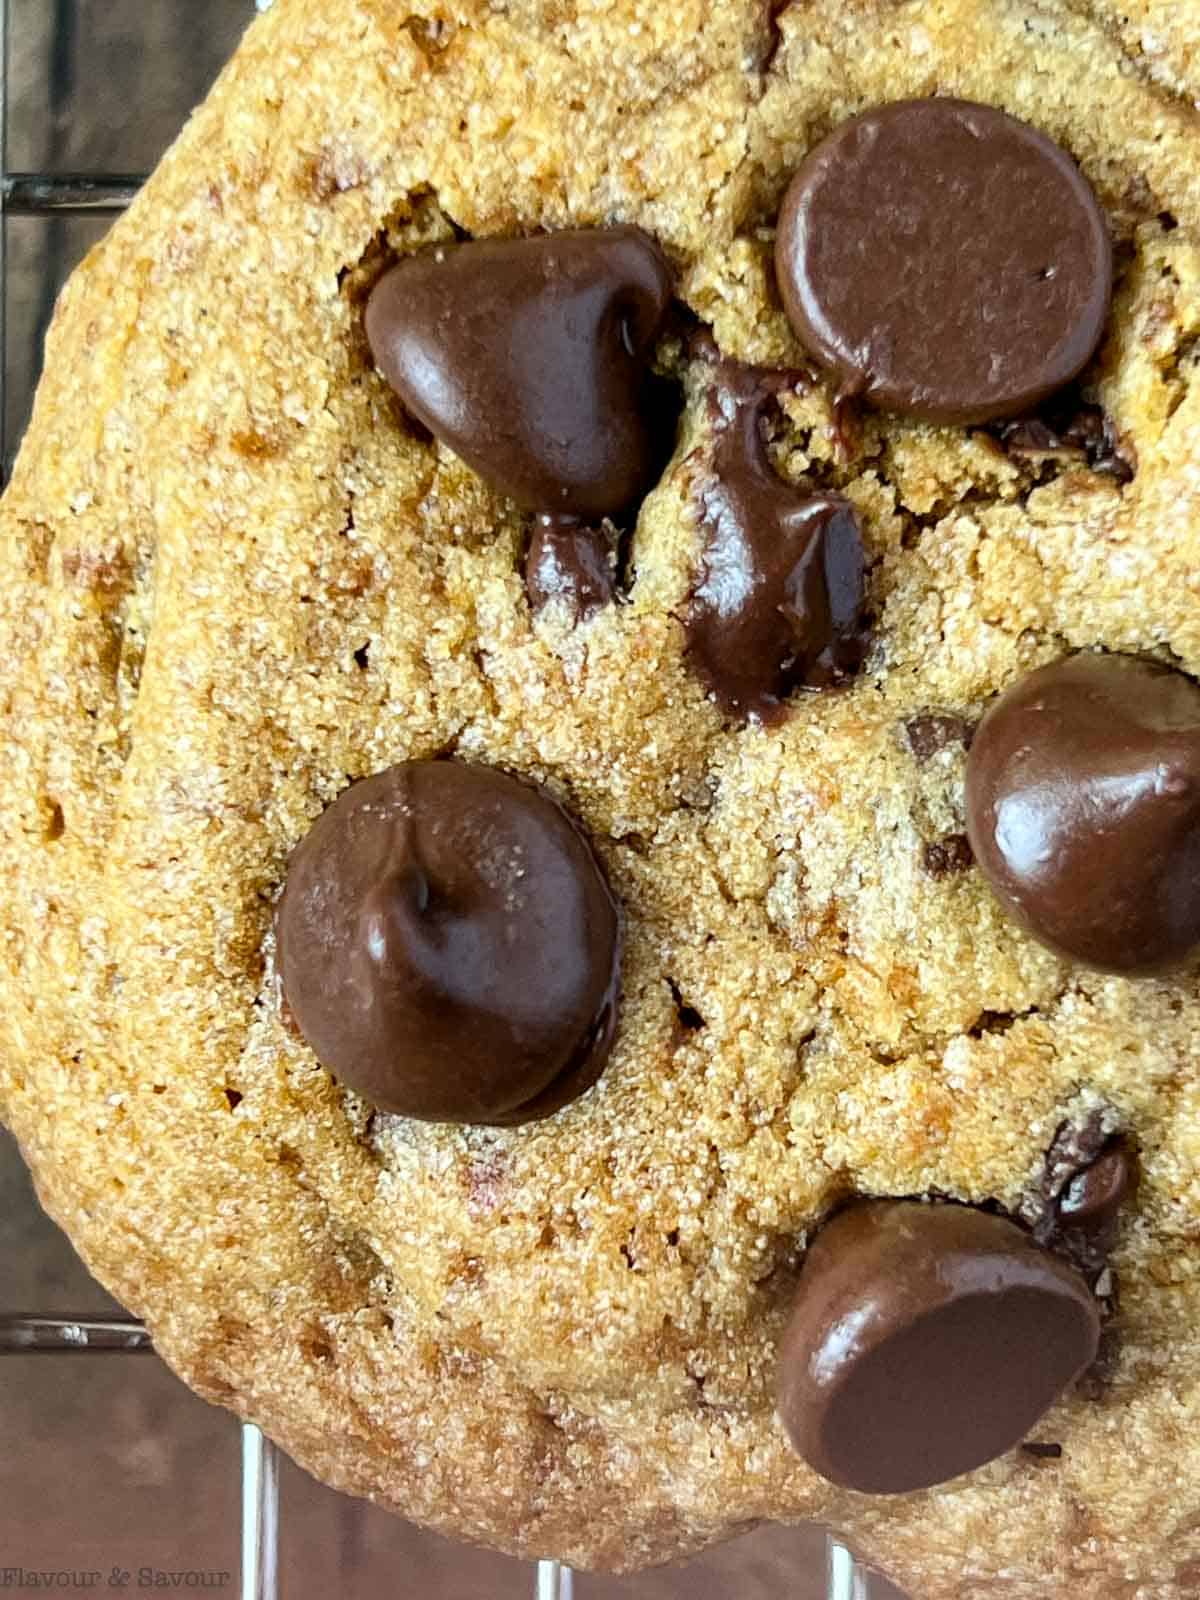 Close up view of a Gluten-free Chewy Chocolate Chip Cookie.